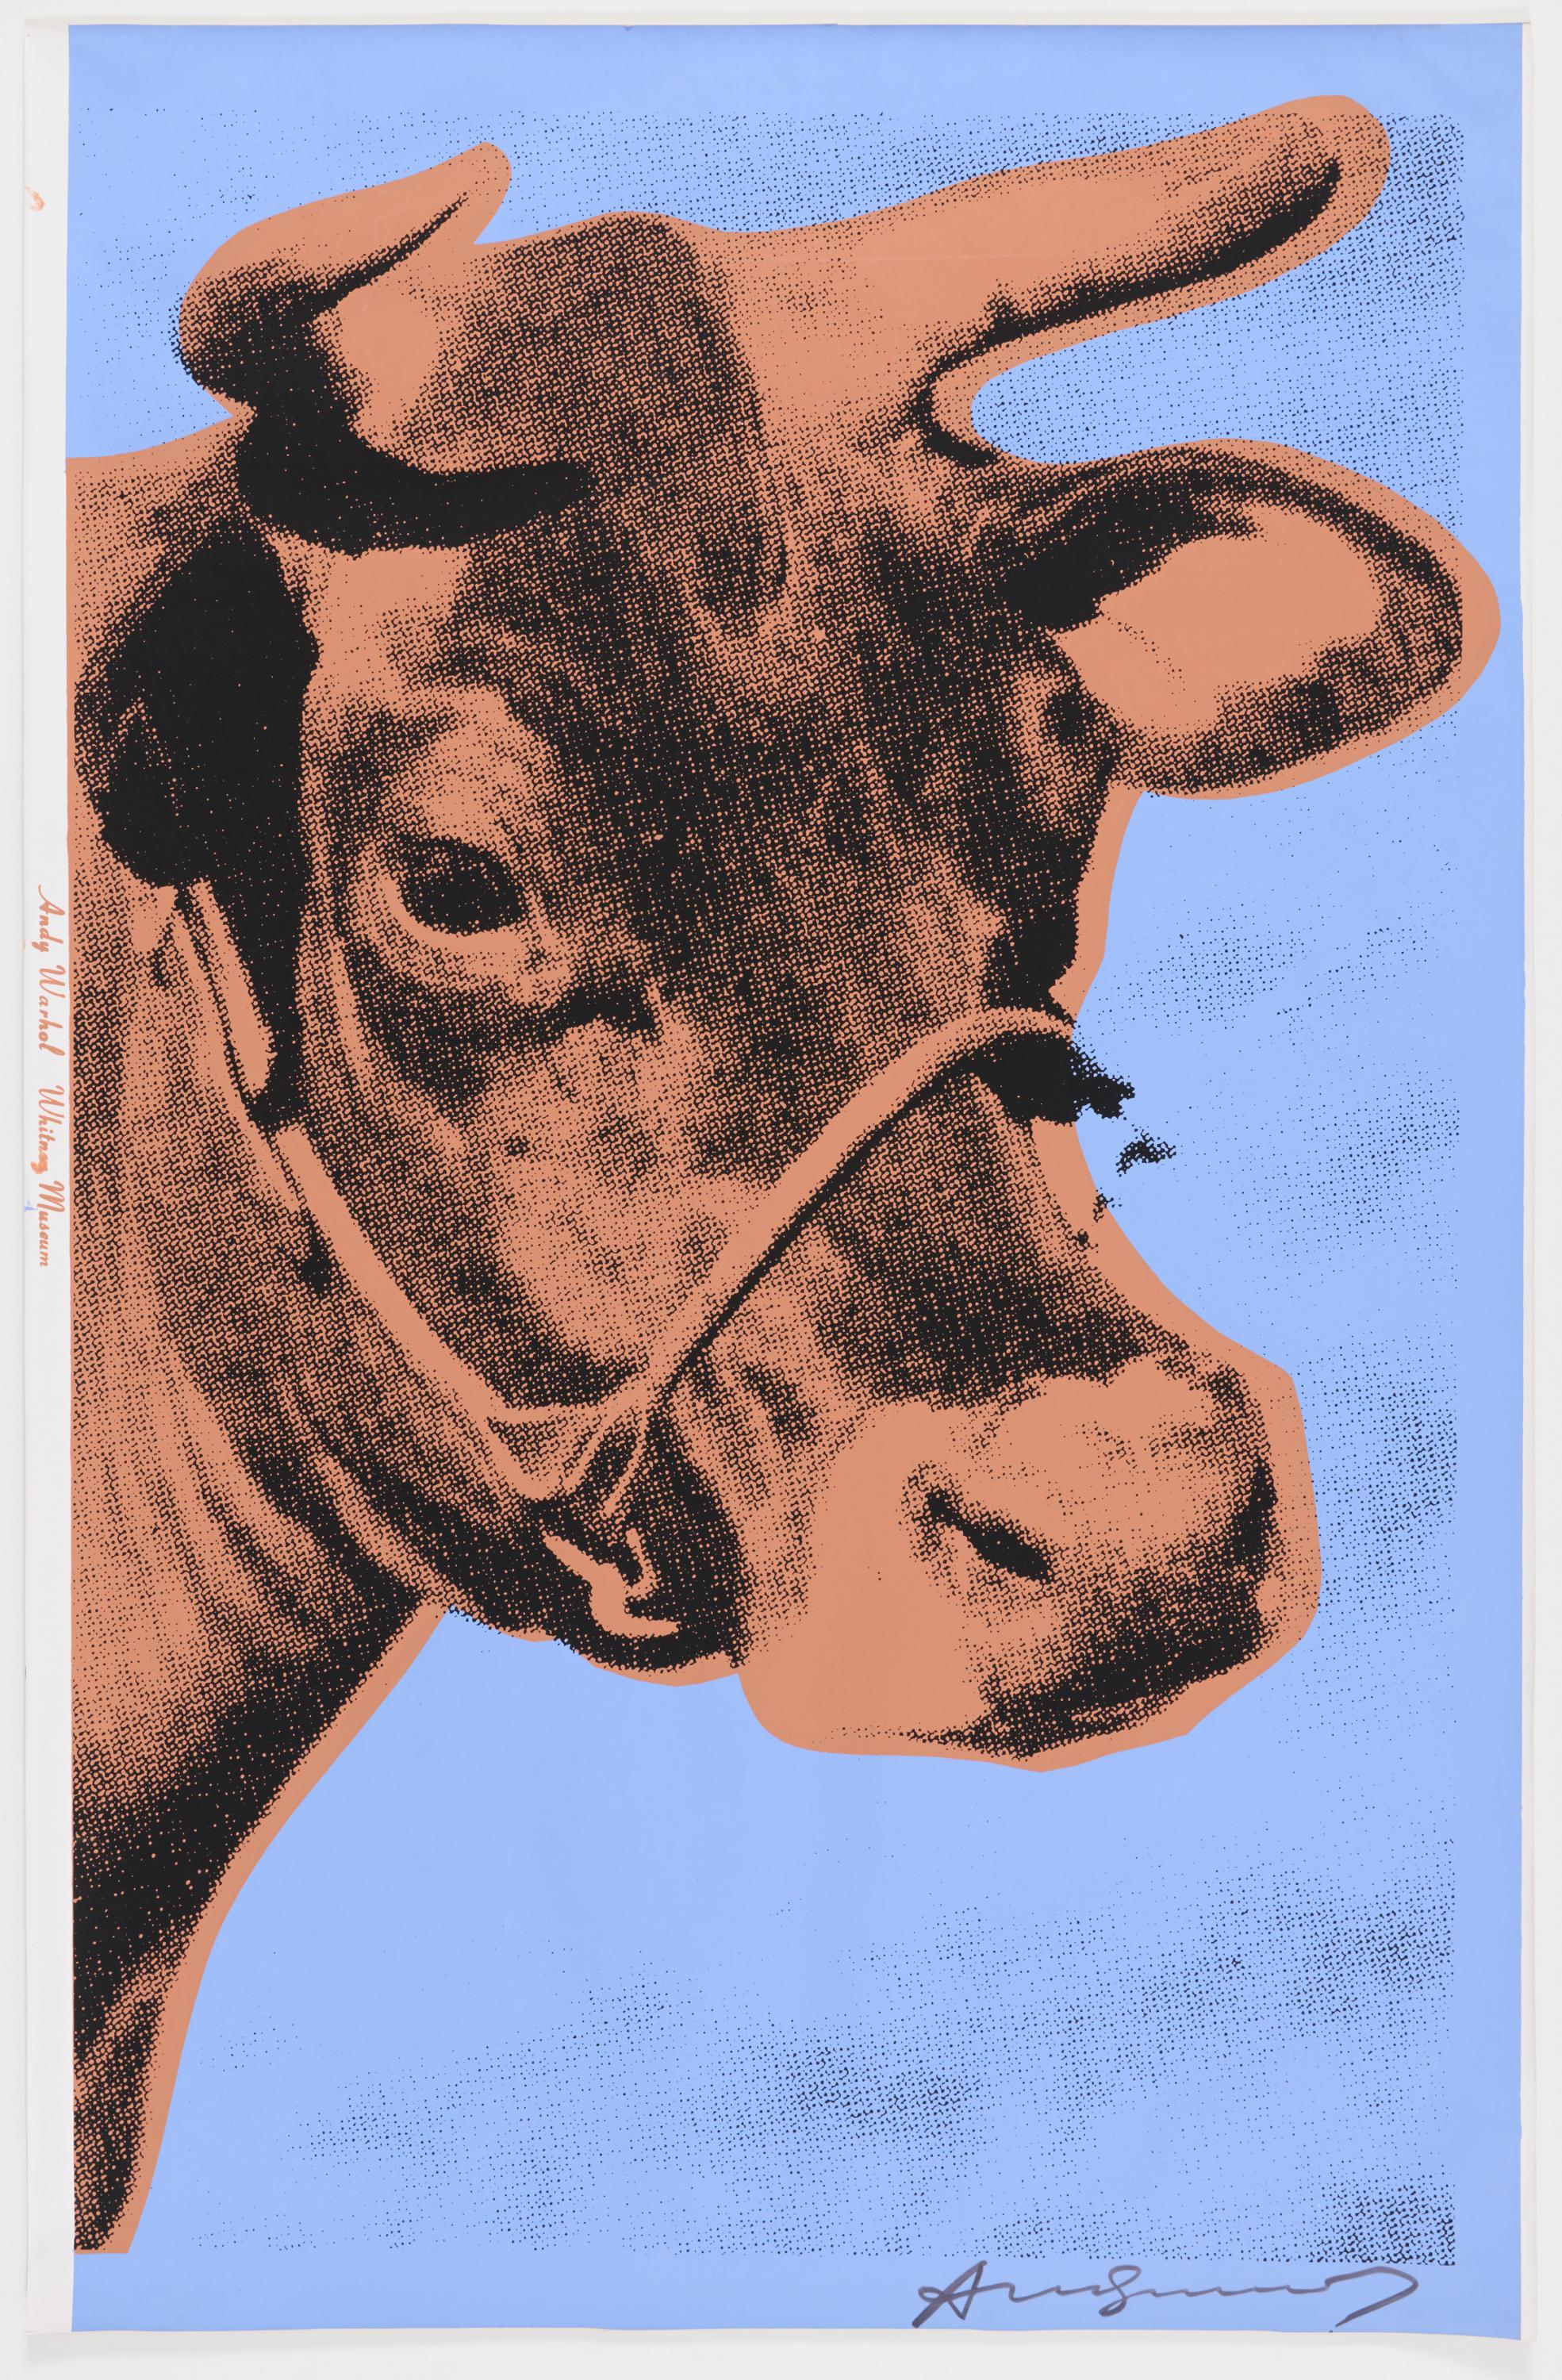 Andy Warhol: Cow - Image 2 of 3